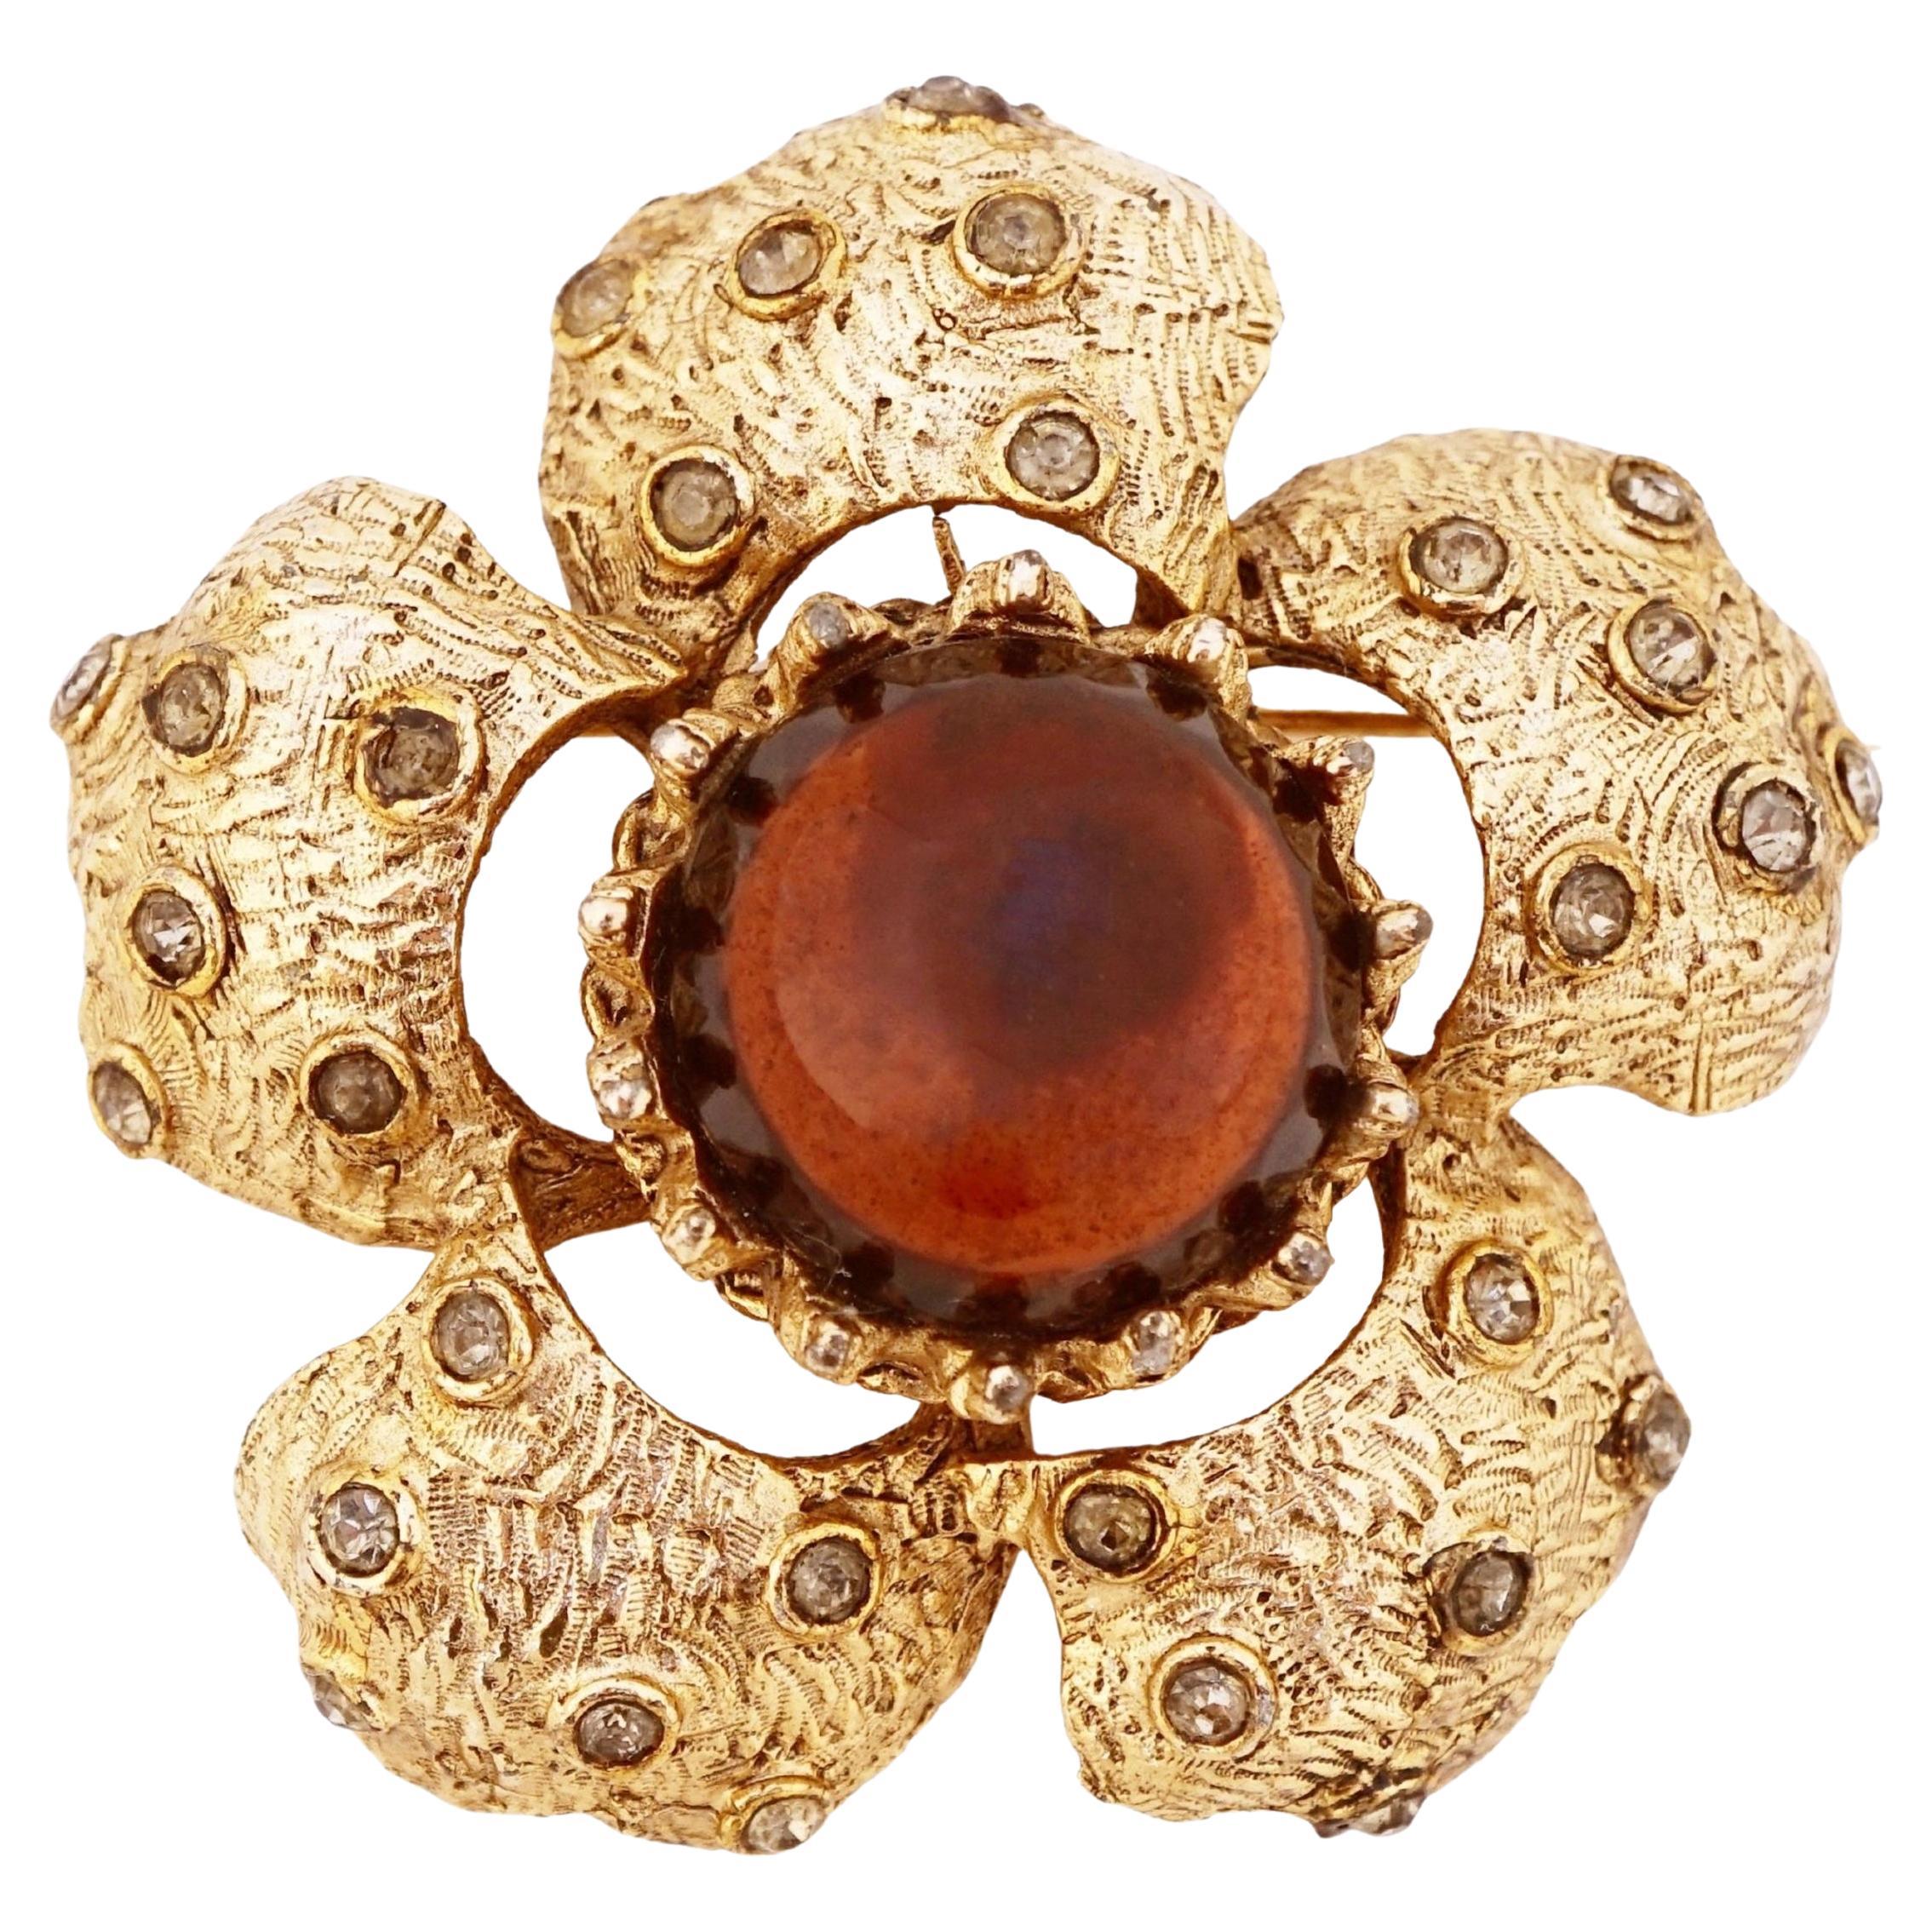 Textured Gold Flower Brooch With Topaz Glass Cabochon By Hobé, 1970s